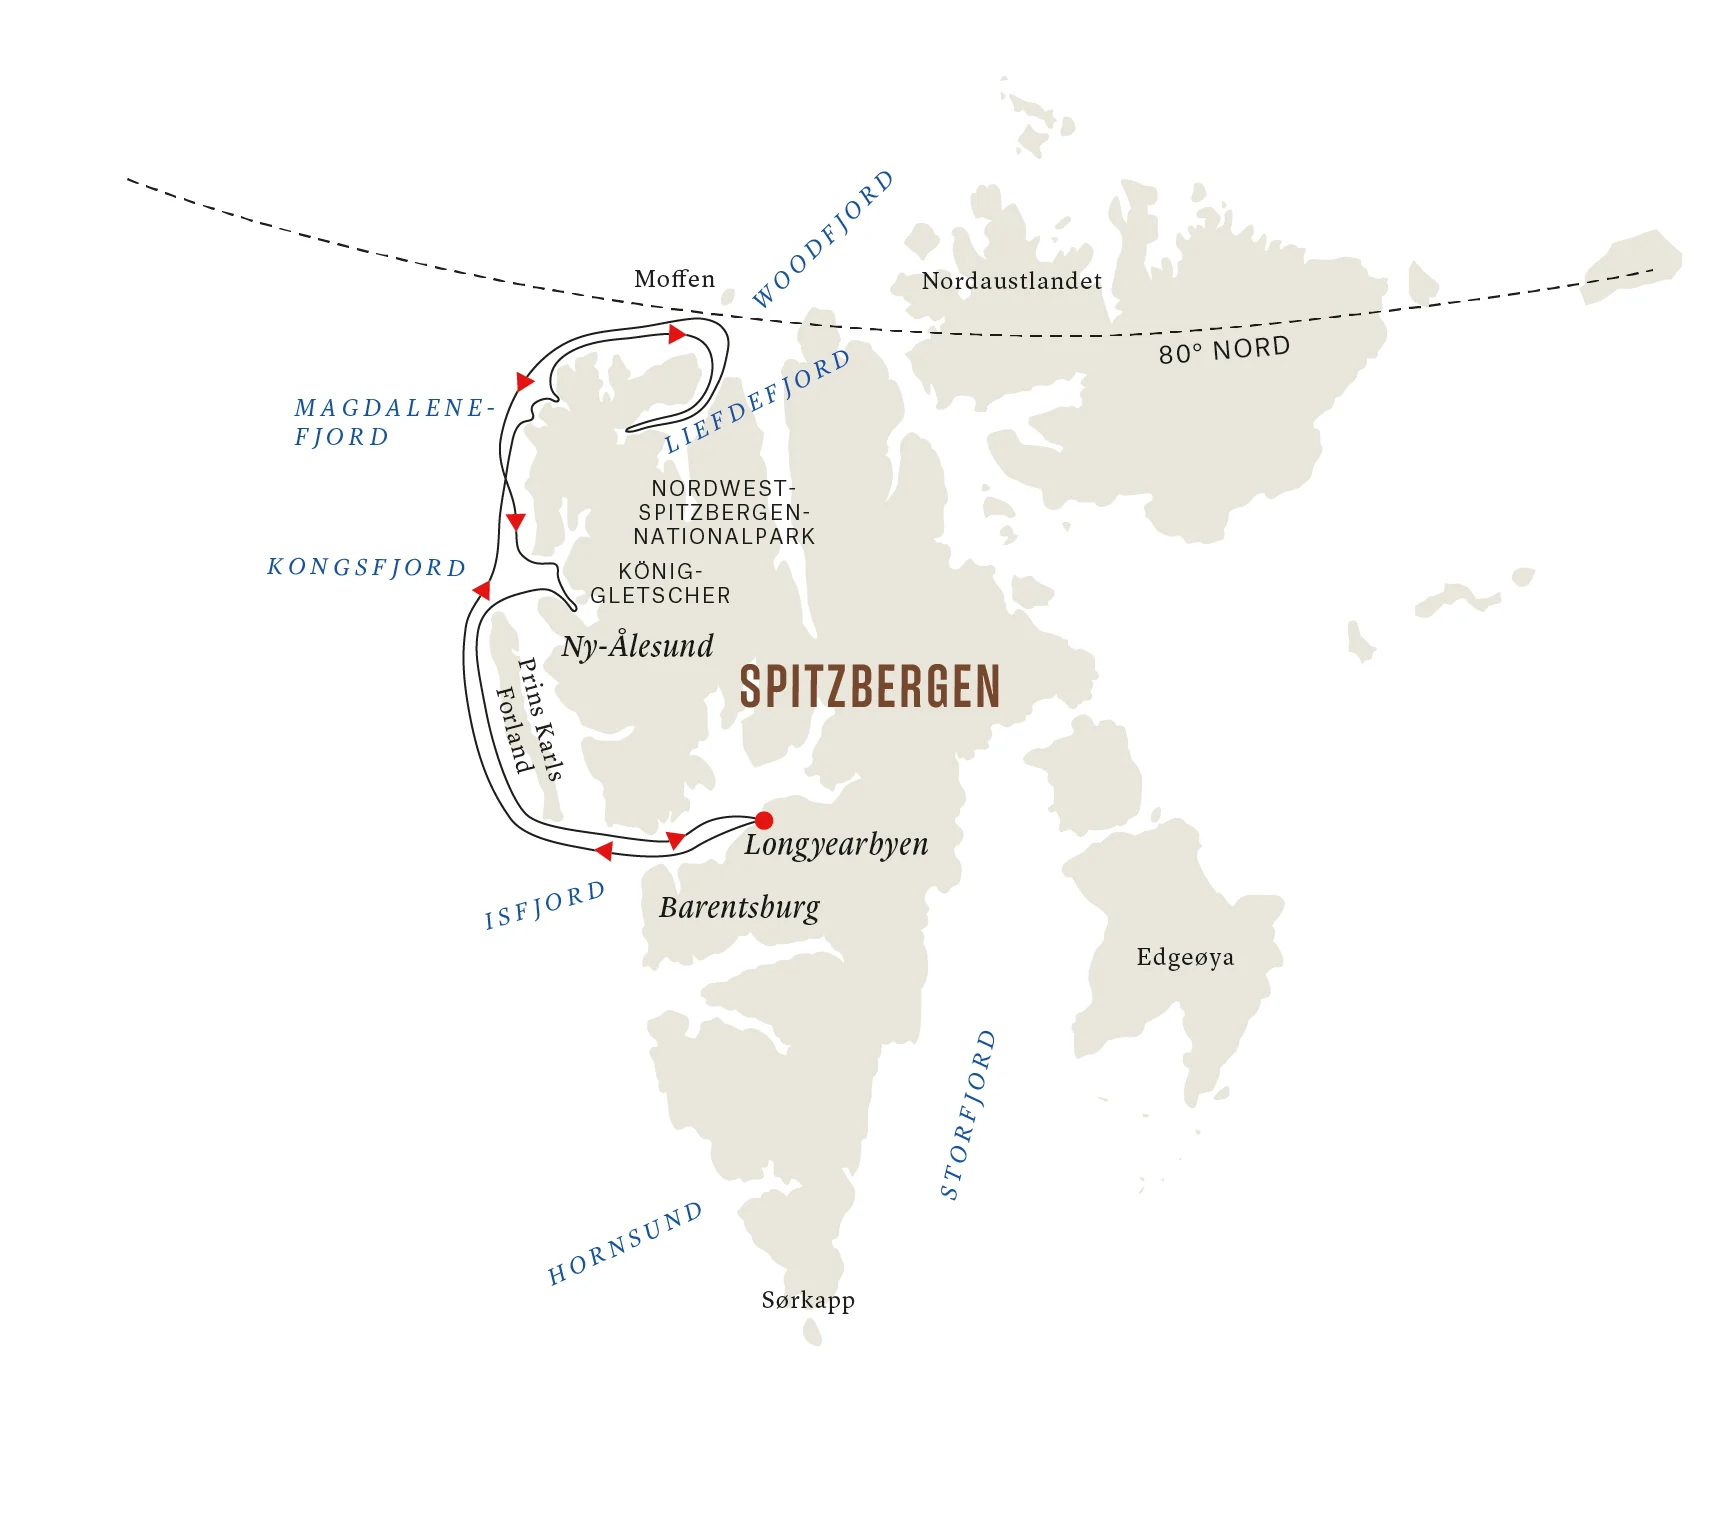 Route map for the Spitsbergen Adventurer cruise in Svalbard